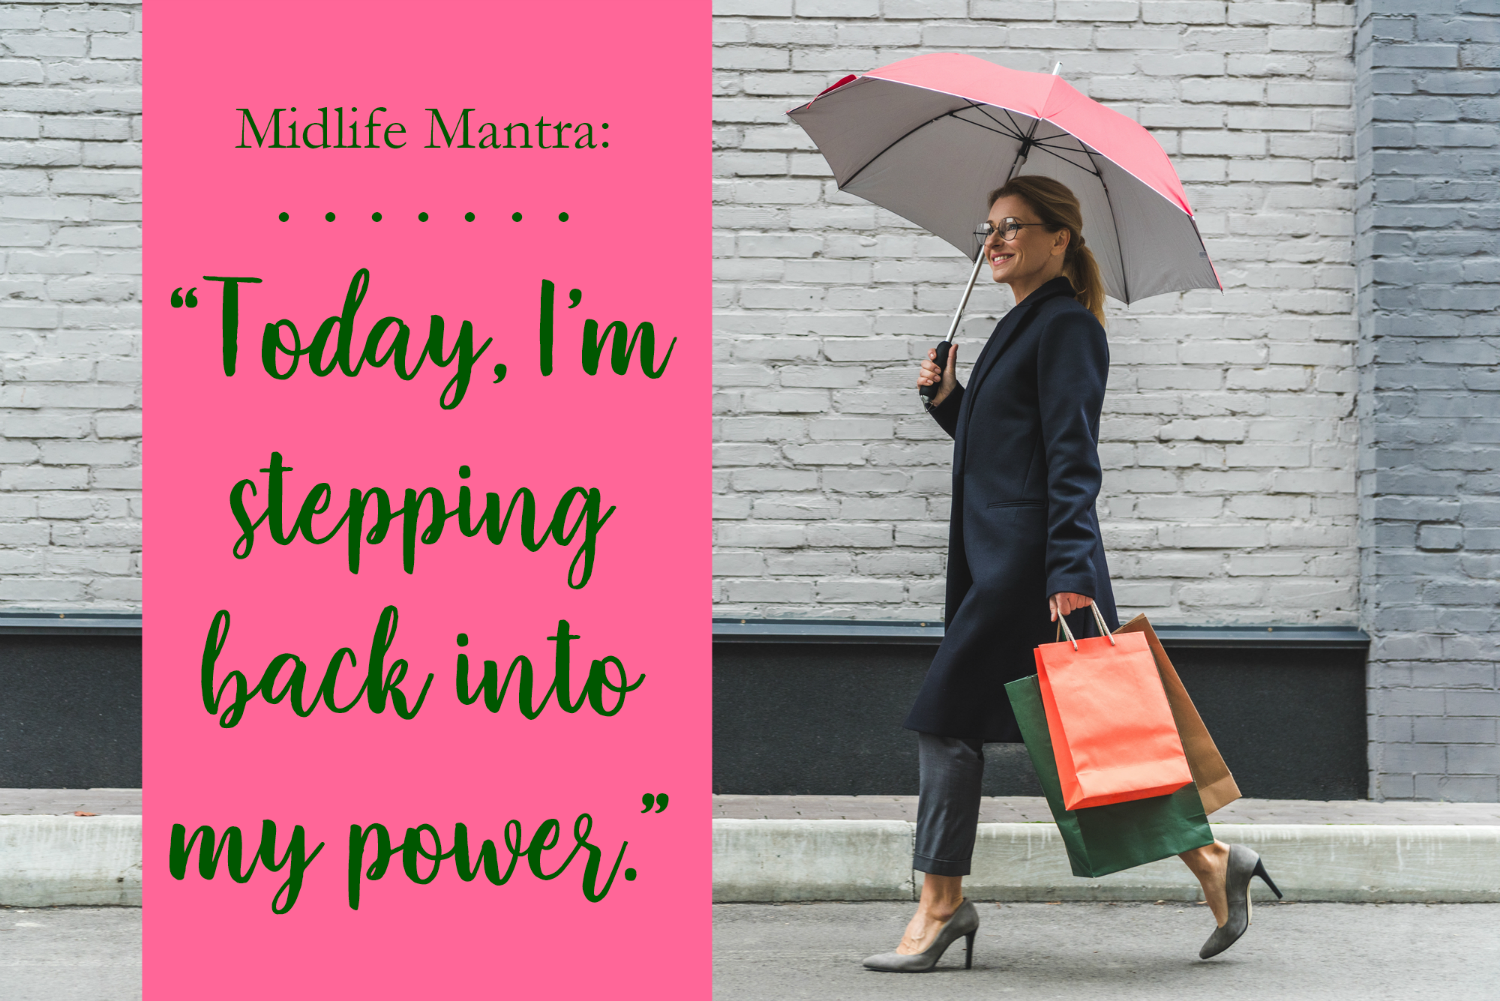 MIDLIFE MANTRA: Step Into My Power